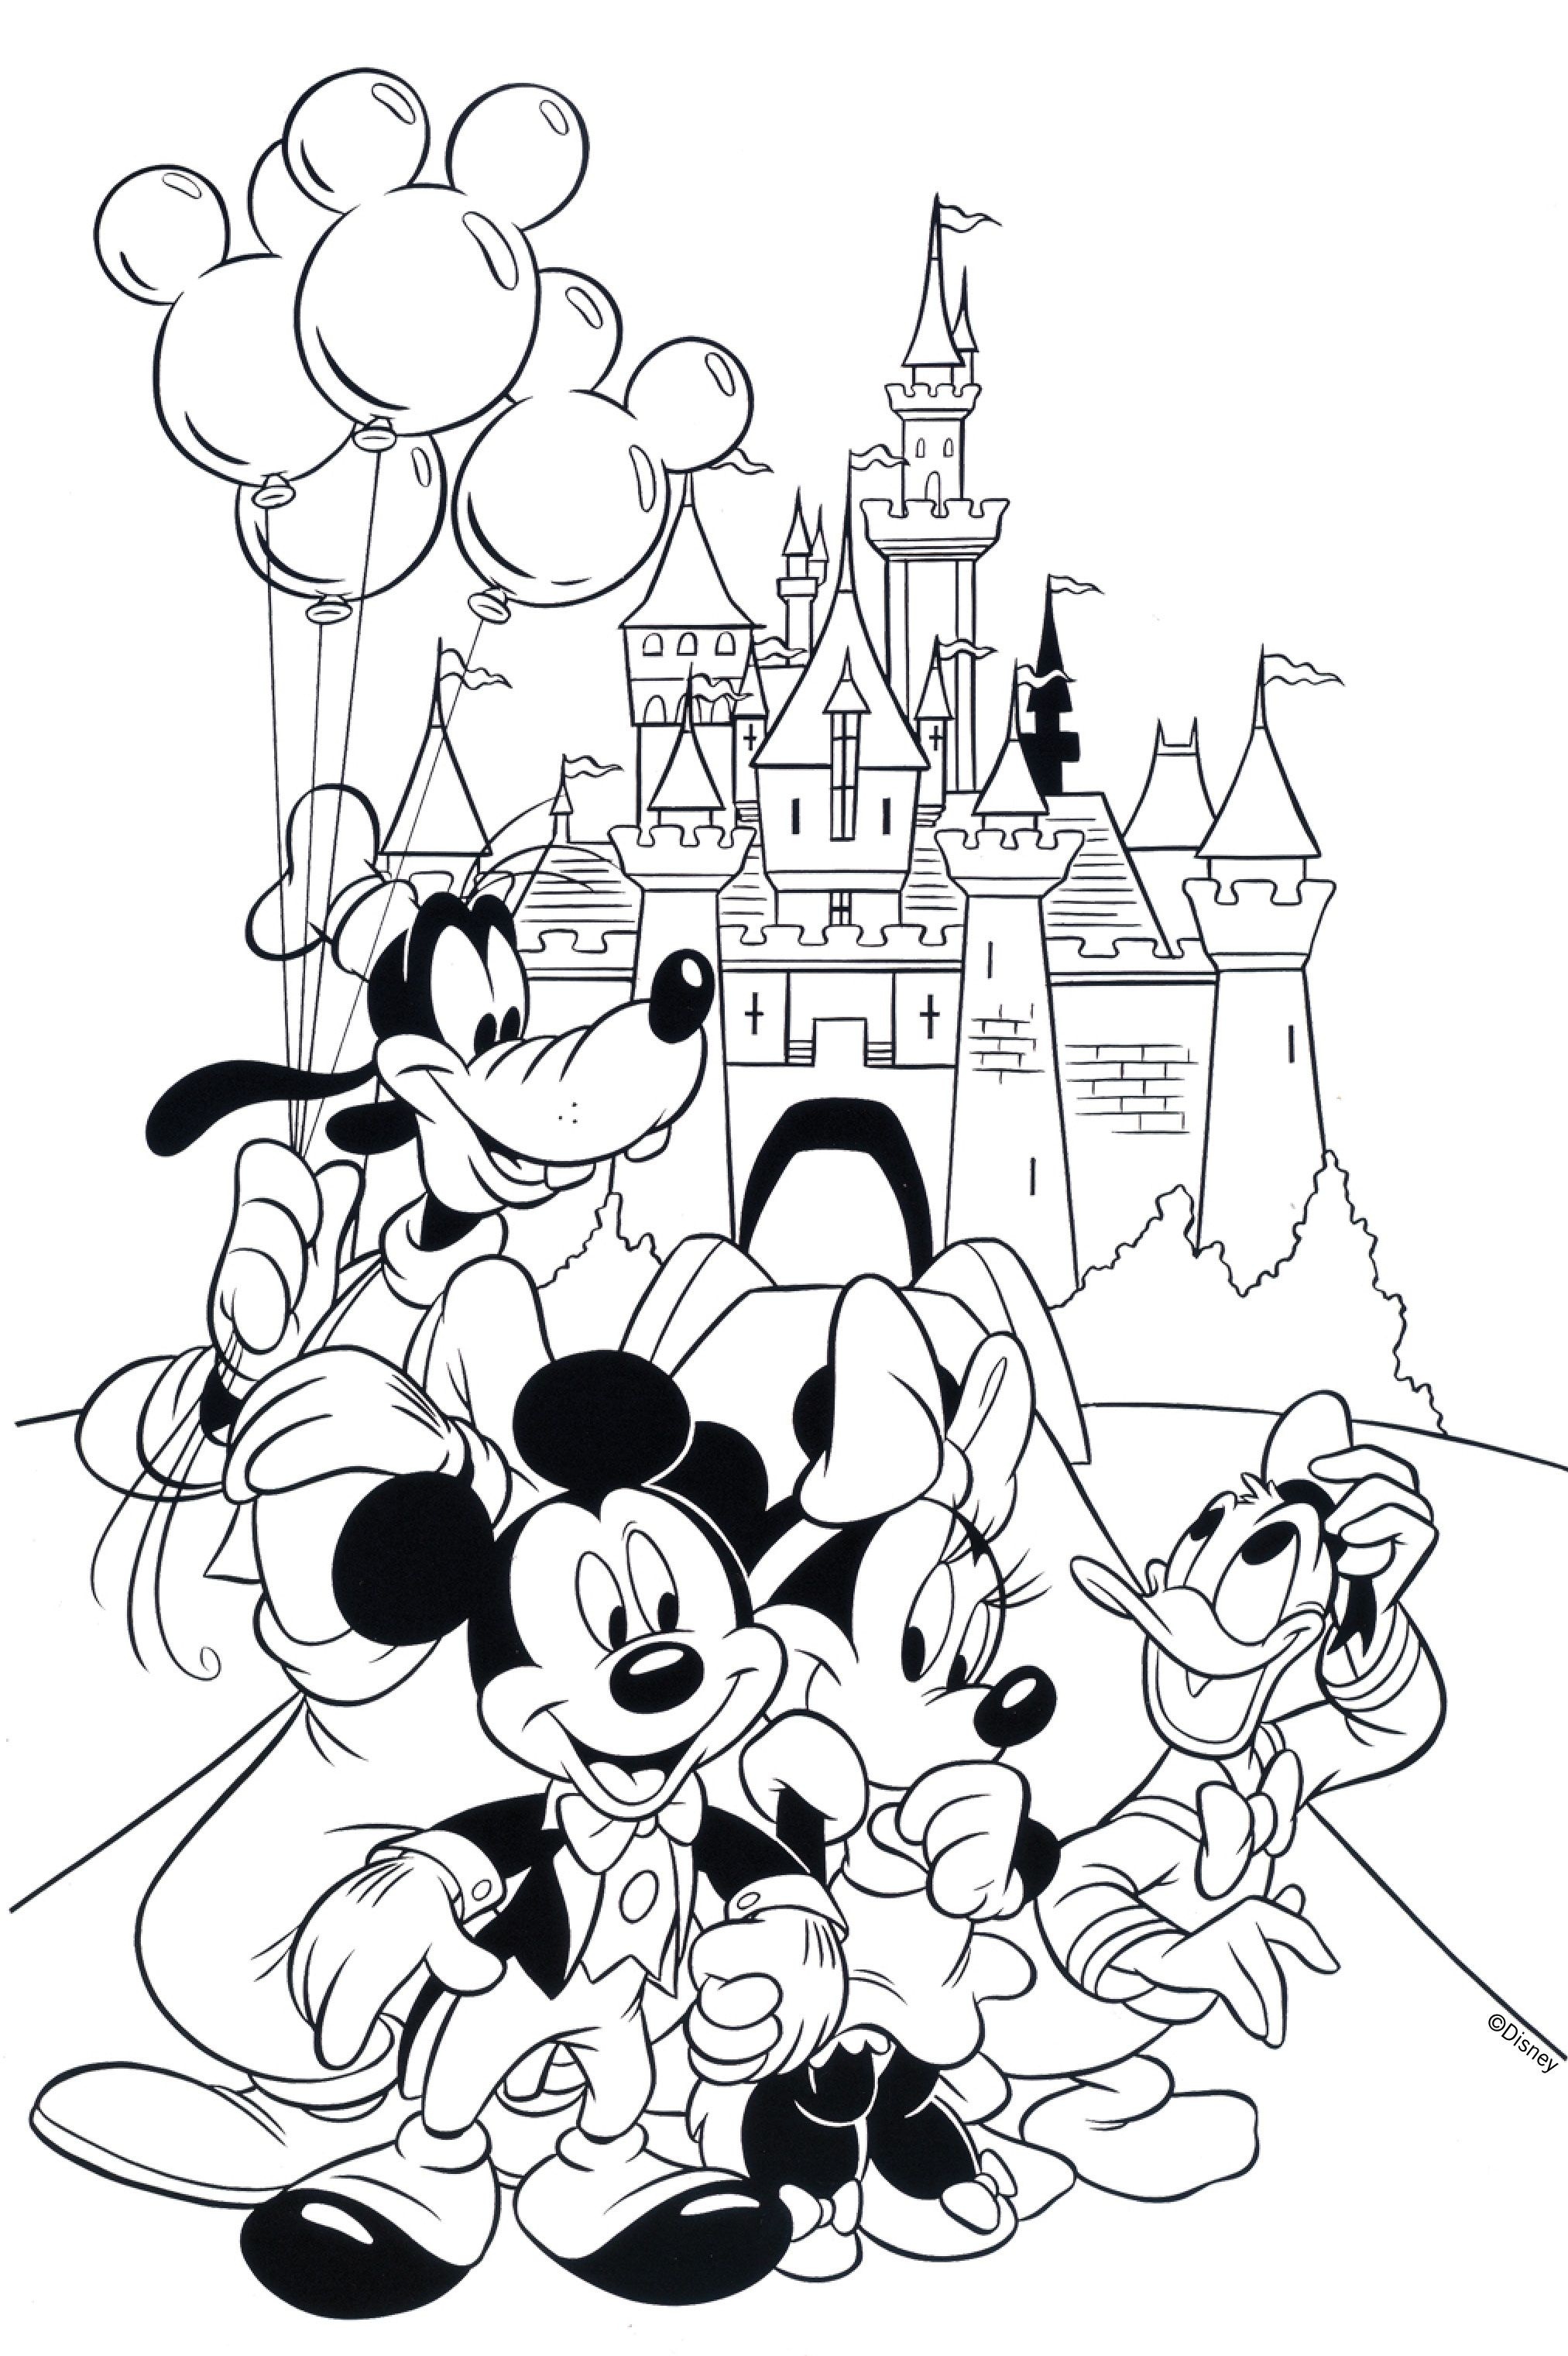 Free Disney Coloring Pages | Coloring Books | Disney Coloring Pages - Free Printable Disney Coloring Pages